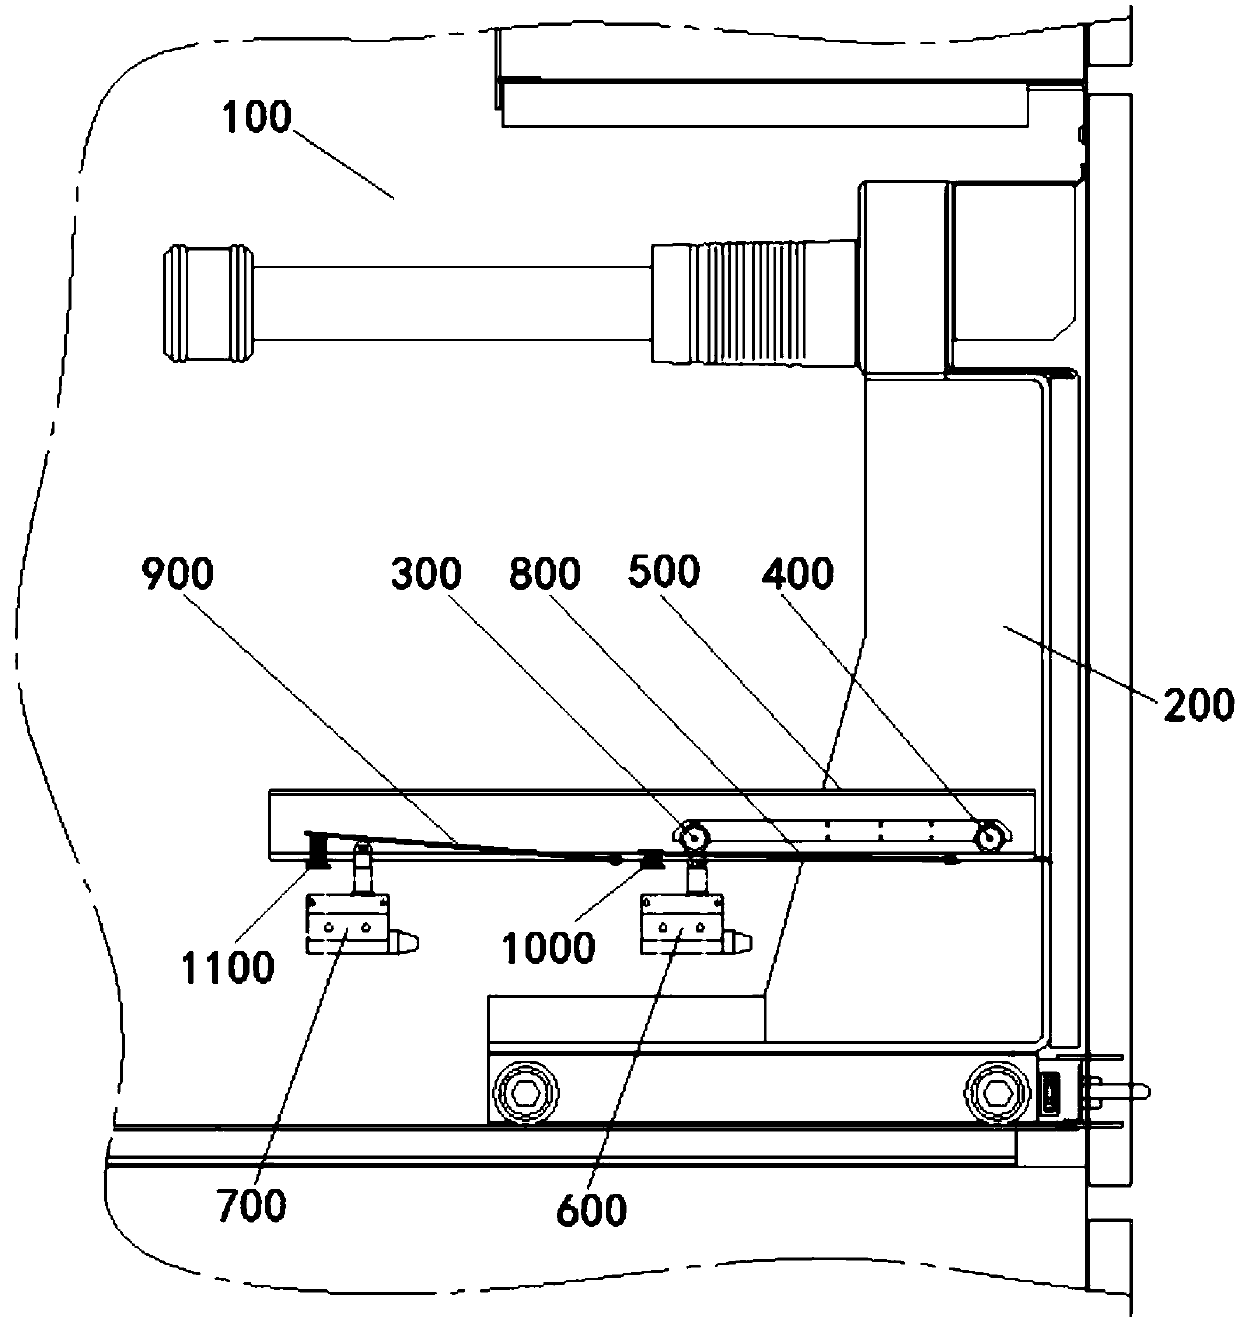 Position monitoring device for grounding handcart of switch cabinet